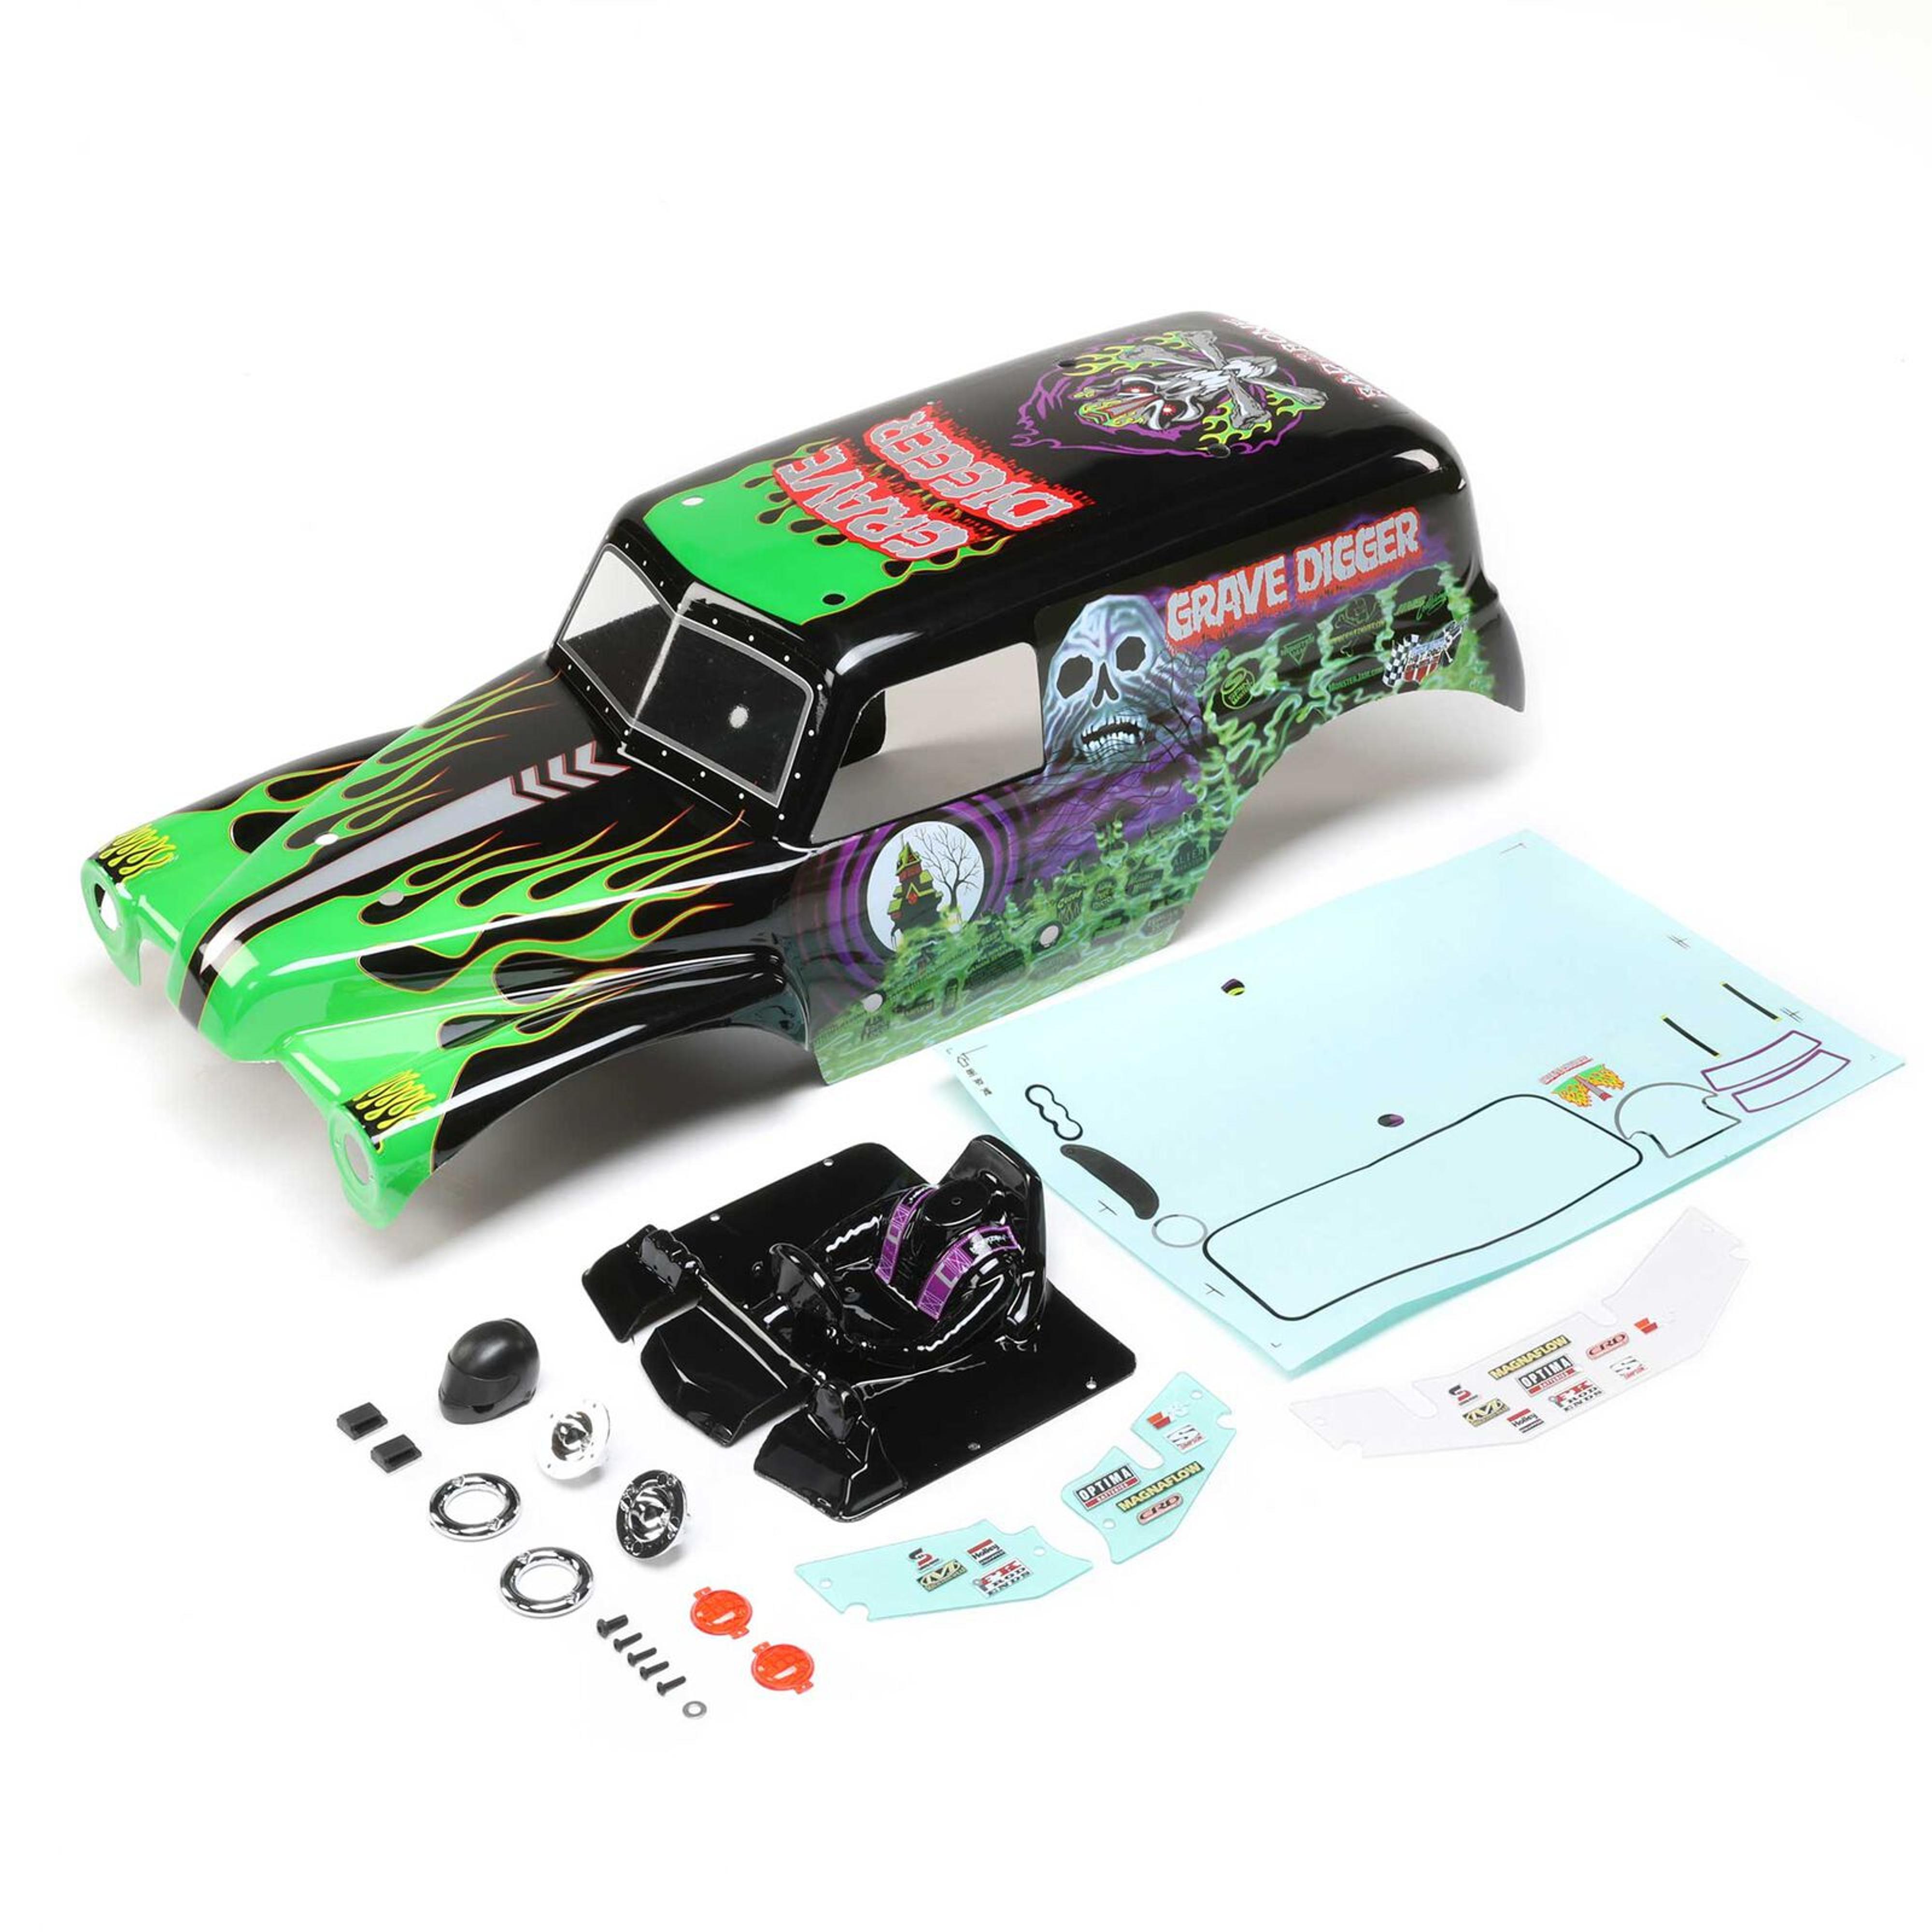 Losi Painted Body Set (Grave Digger, LMT)